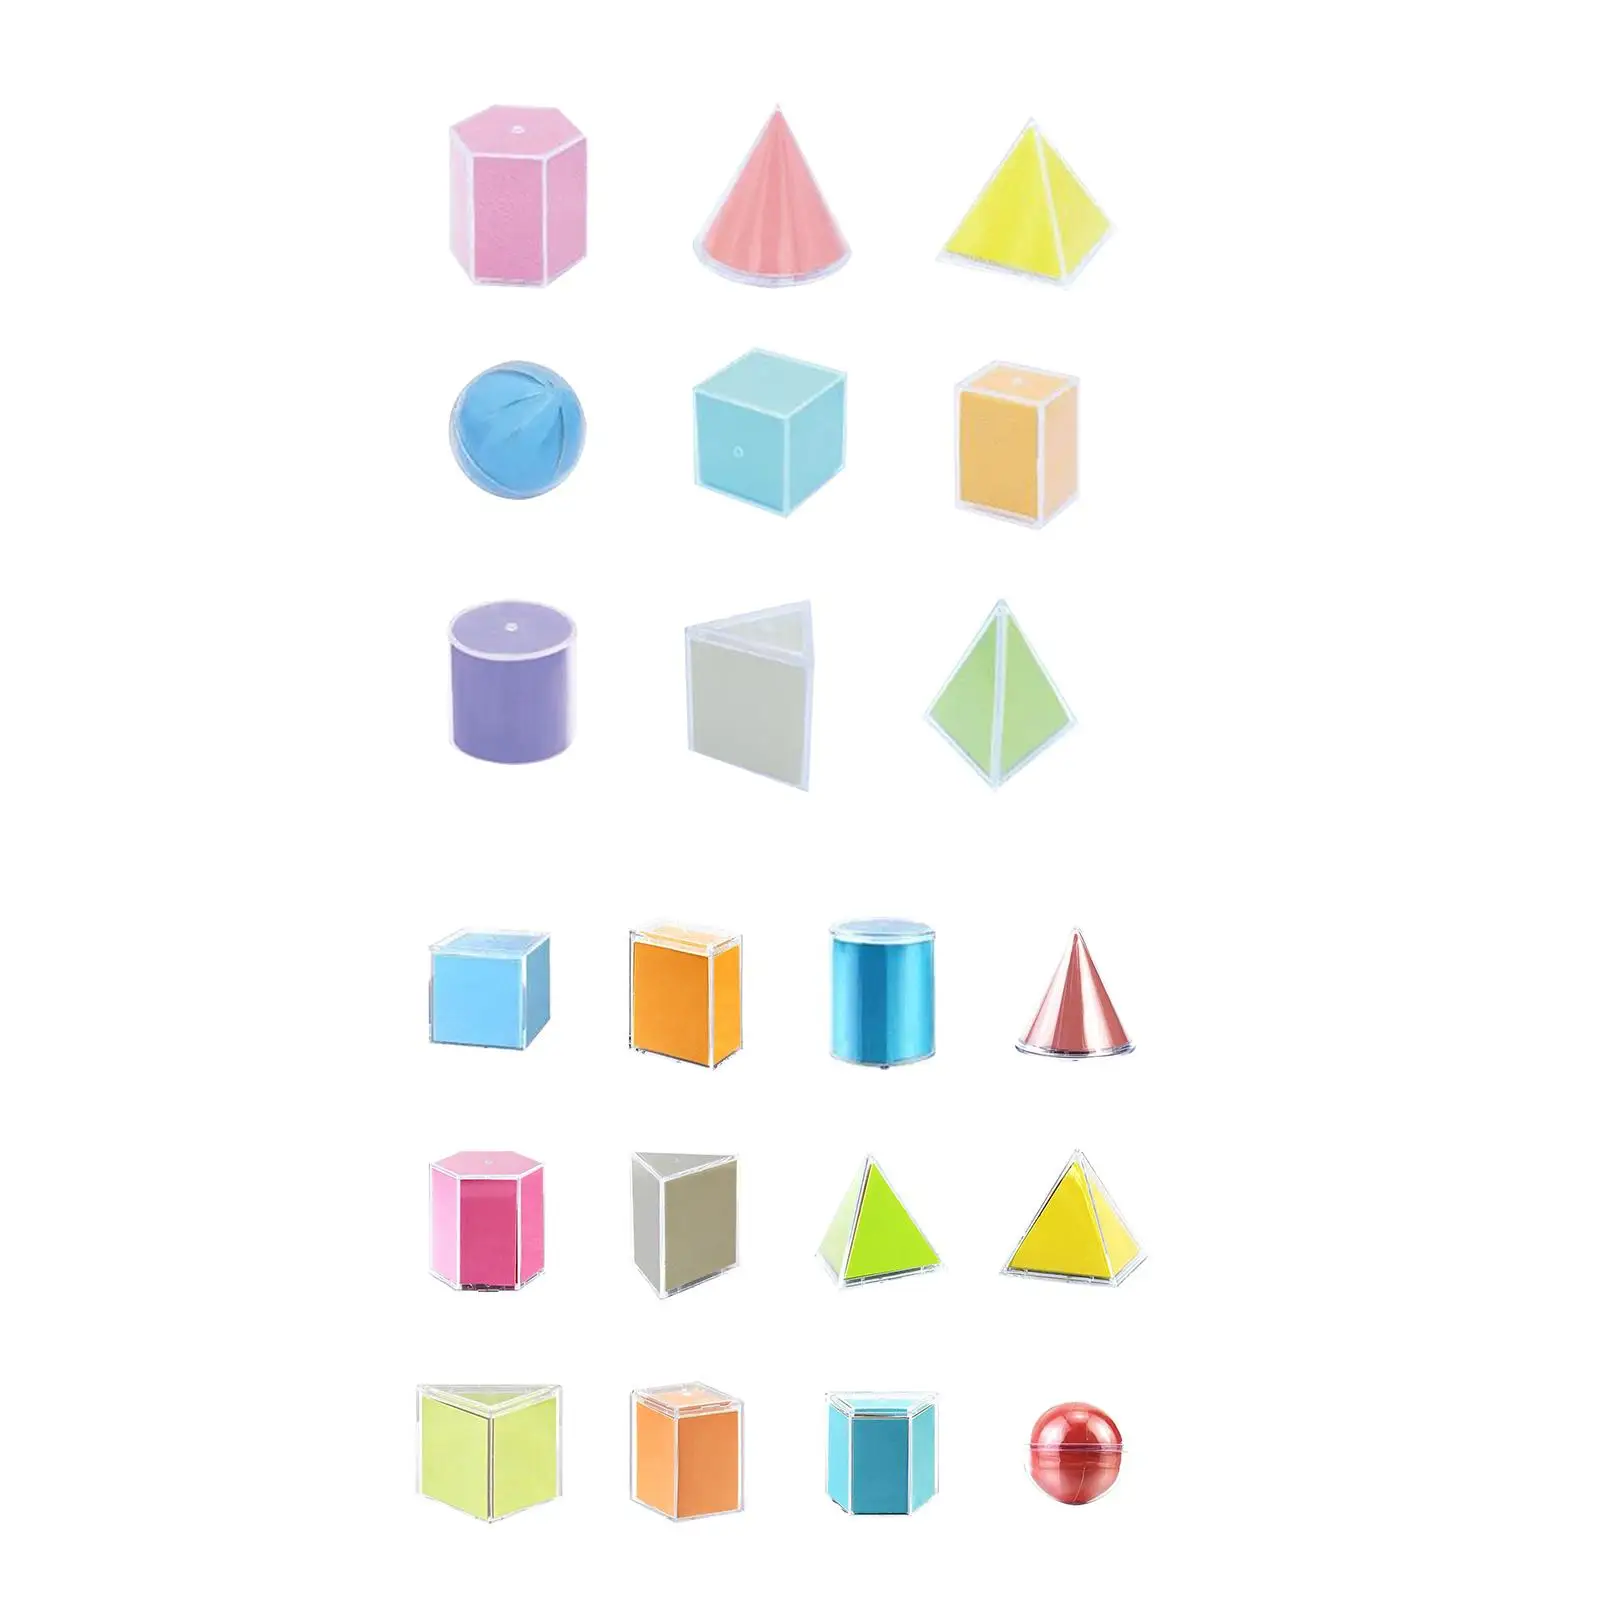 

3D Shapes Geometric Solids,Geometric Montessori Learning Toys,multicolored shapes for Kids,Home School Supplies,Kids Ages 2+